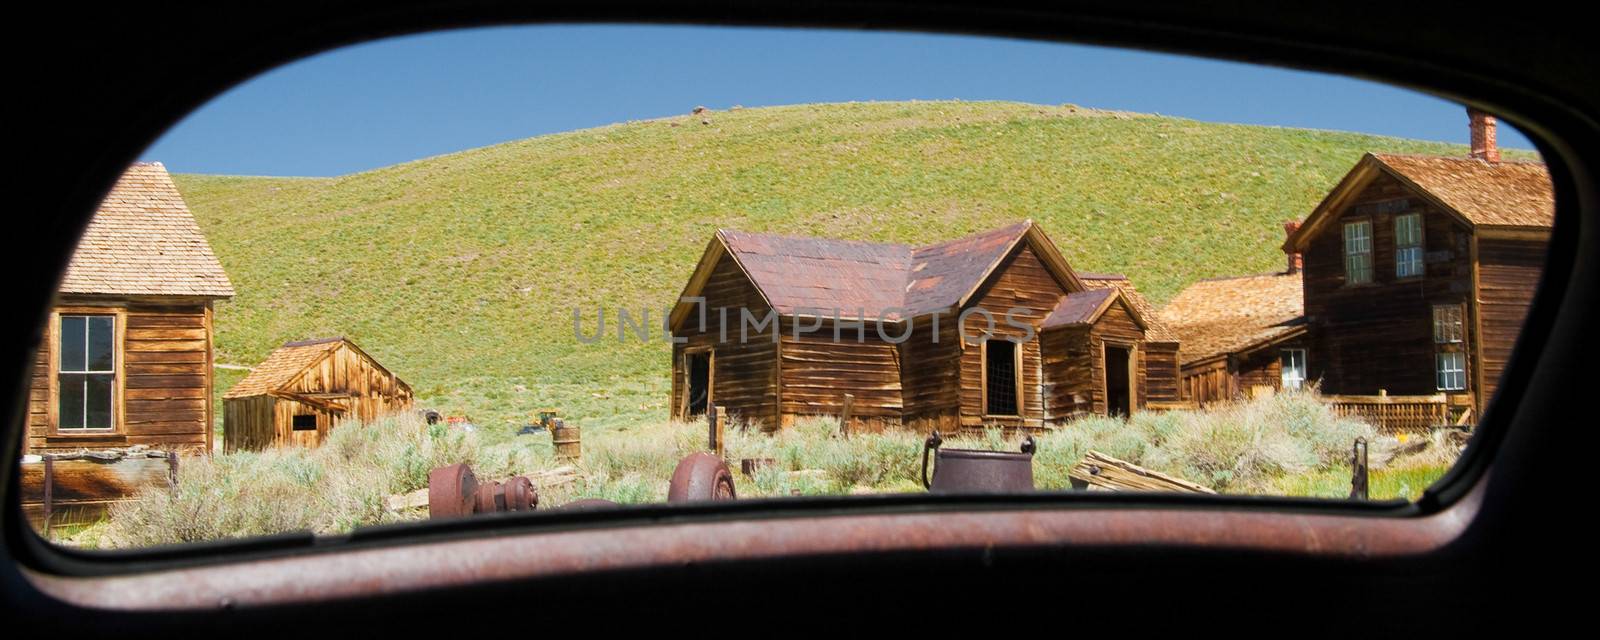 Abandoned buildings viewed through from a mirror of a car, Bodie Ghost Town, Bodie State Historic Park, Mono County, California, USA